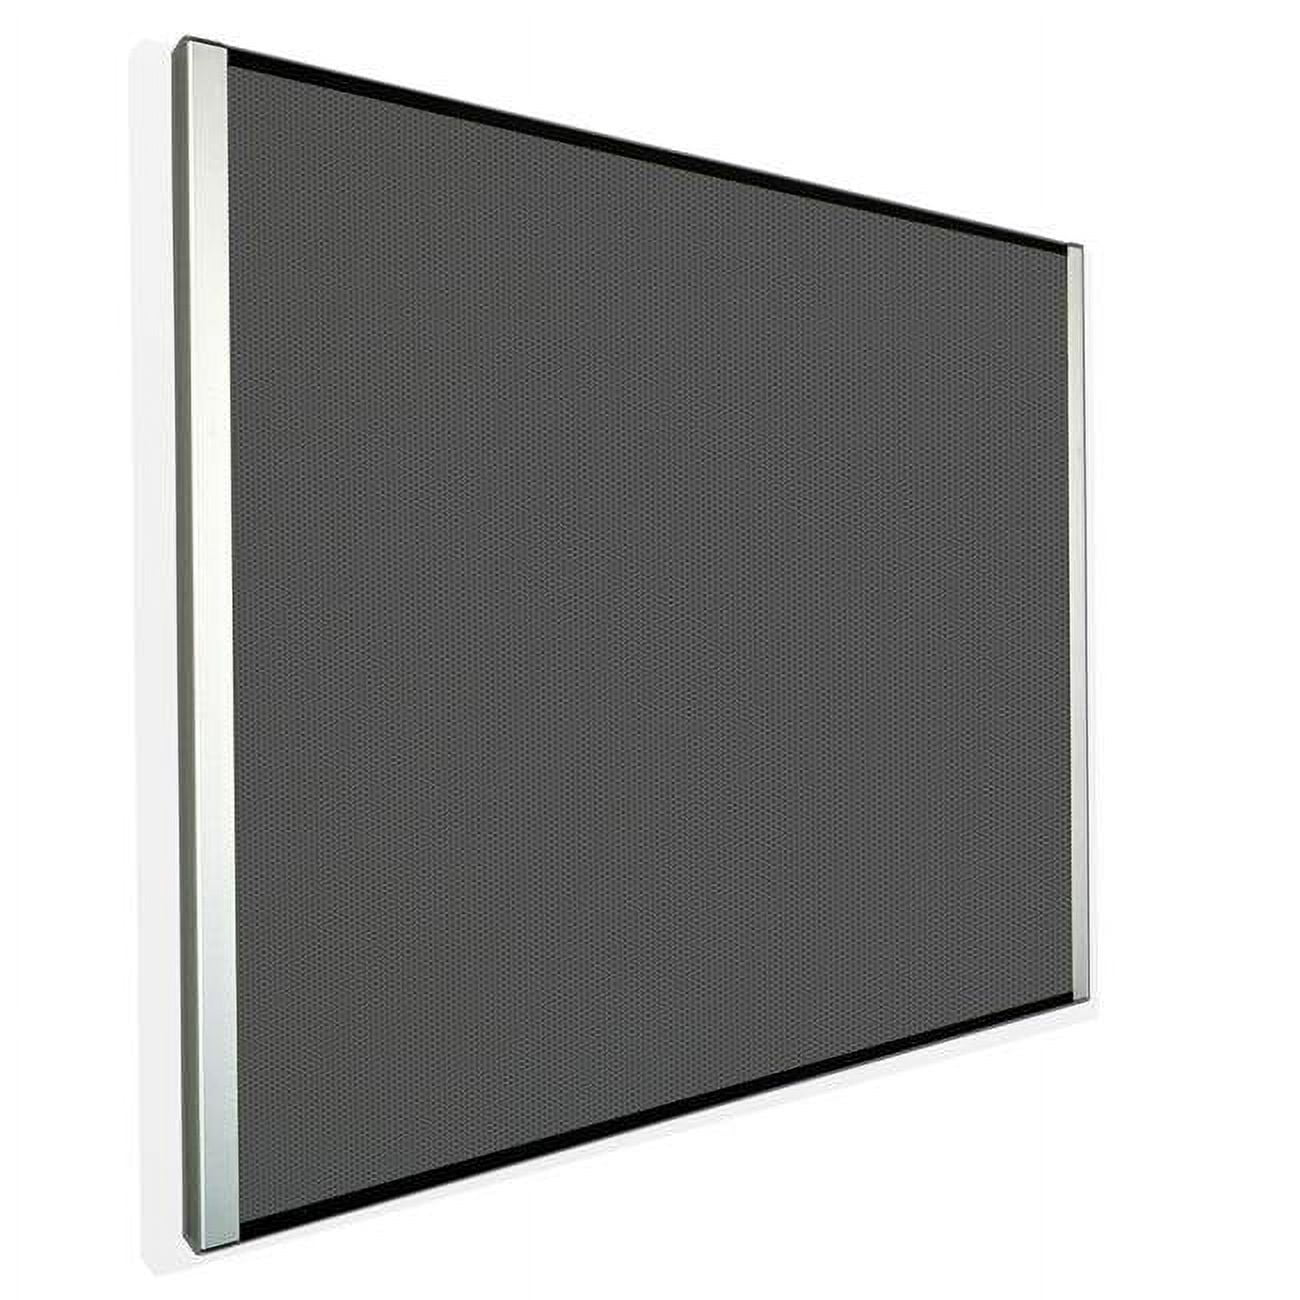 Iceberg 34110 24 X 38 In. Perforated Steel Magnetic & Tackable Bulletin Board, Charcoal